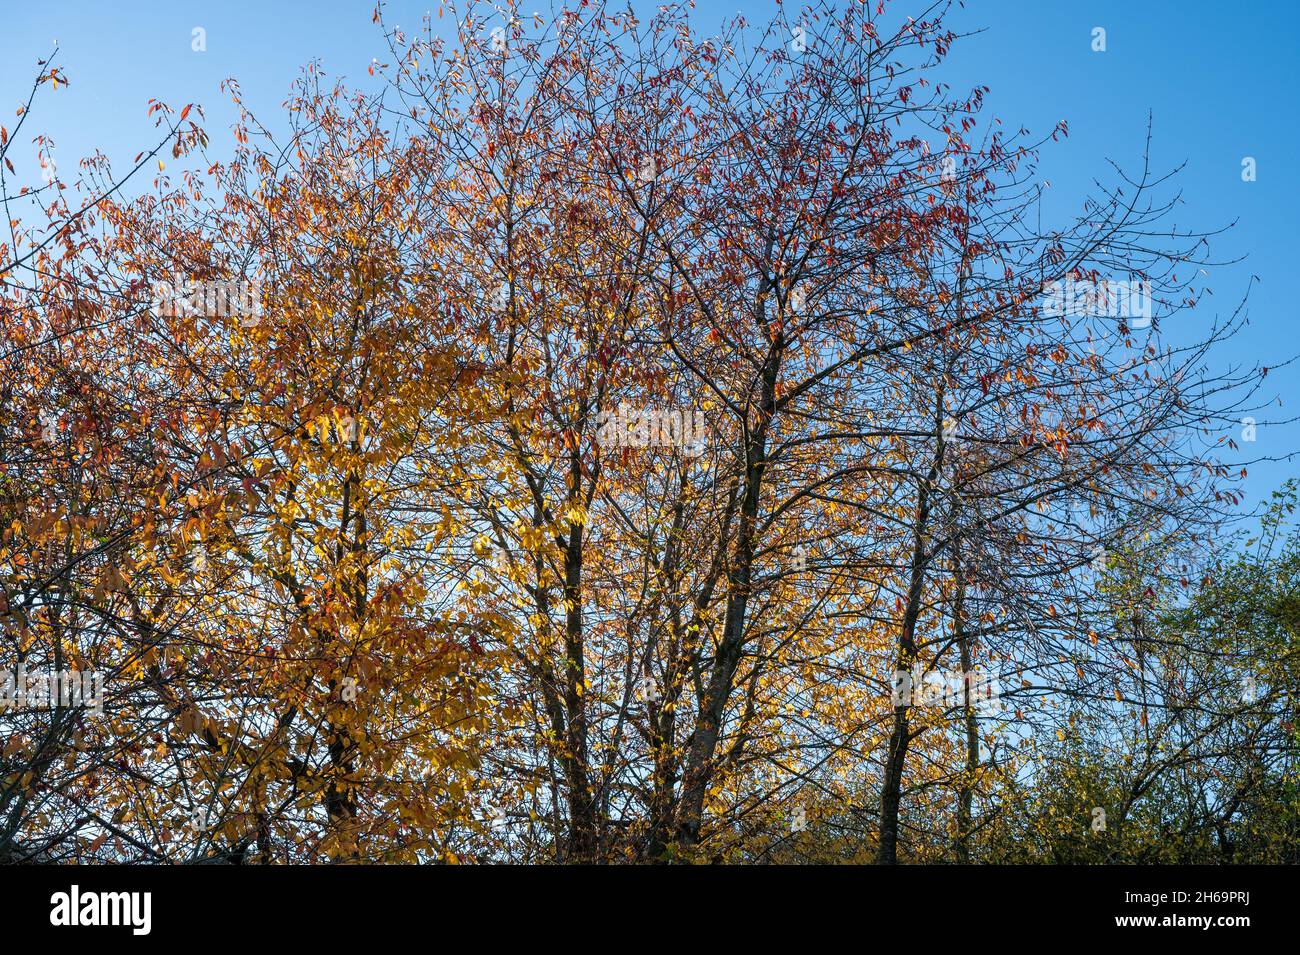 Bright sunshine brought out the autumn colours in the trees in the Shropshire countryside over the weekend. Credit: Phil Pickin/ Alamy Live News Stock Photo